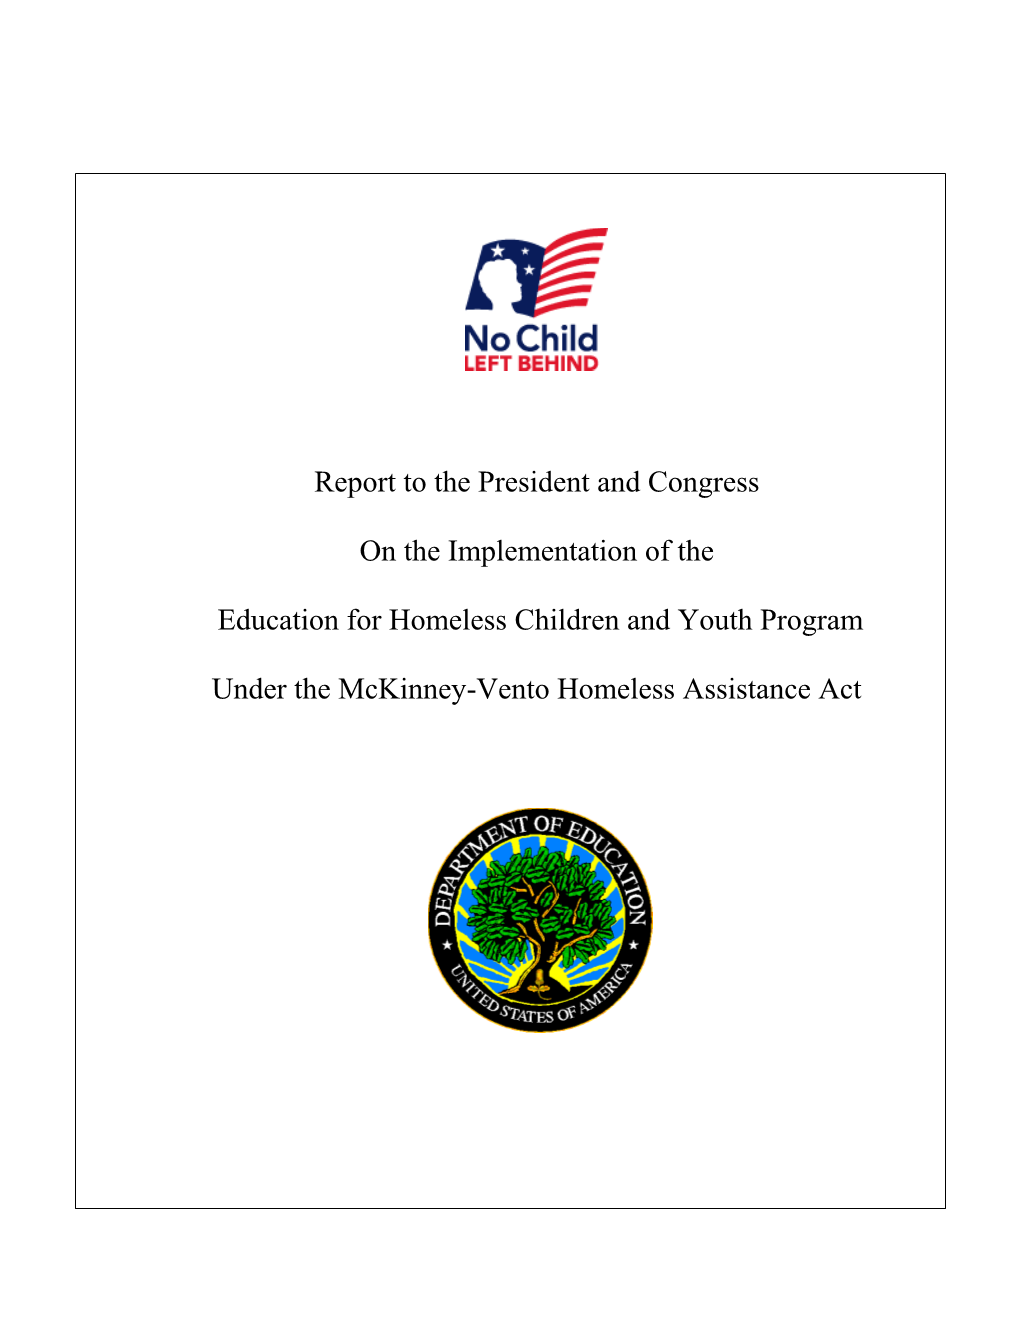 Report to the President and Congress on the Implementation of the Education for Homeless